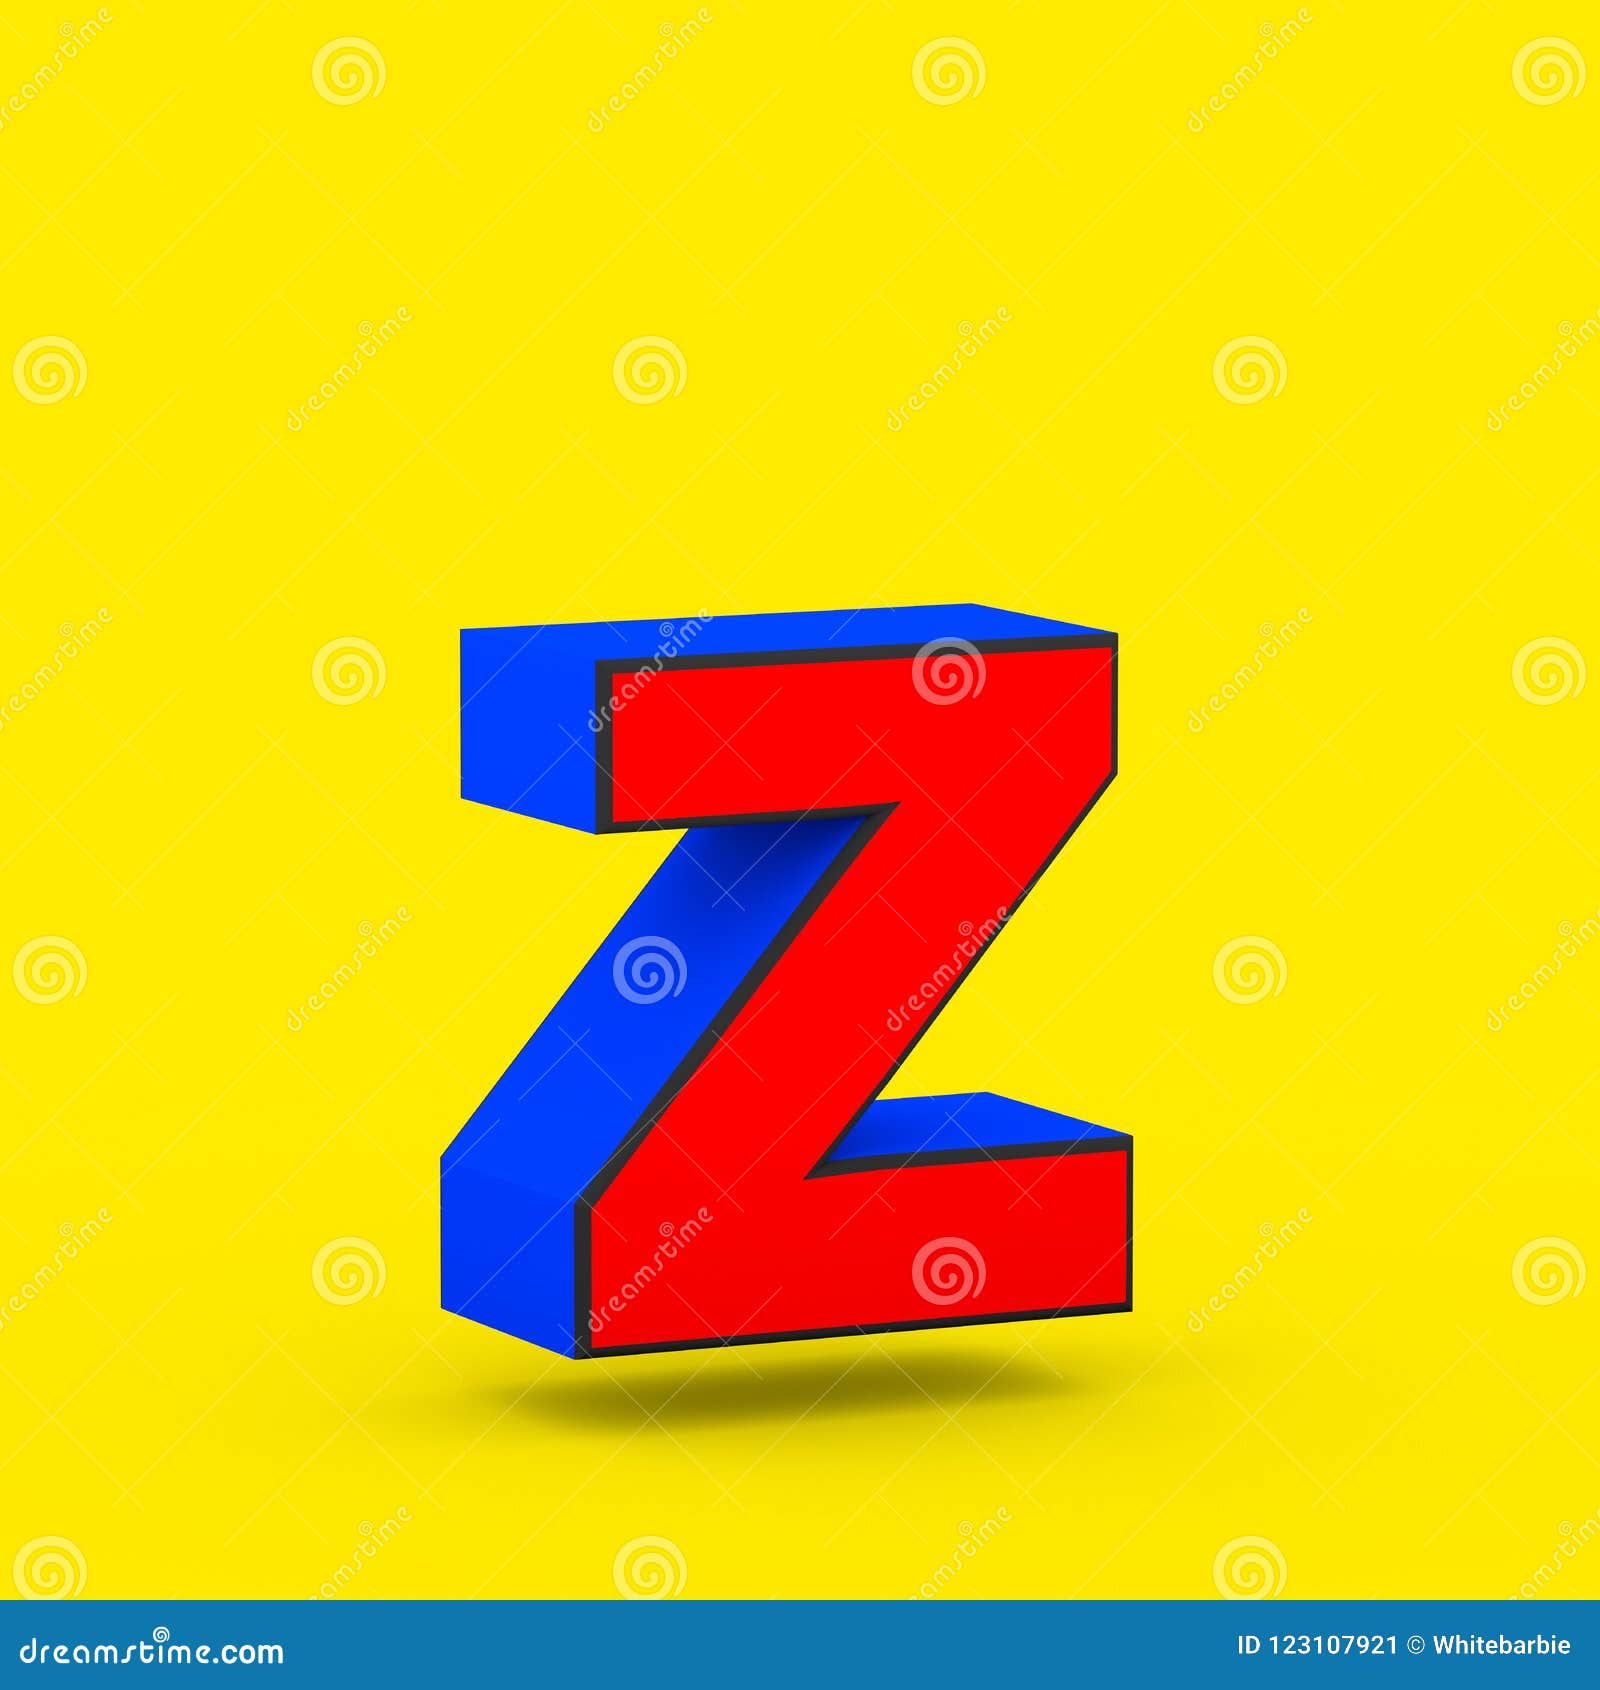 Red and Blue Superhero Letter Z Lowercase Isolated on Yellow Background ...